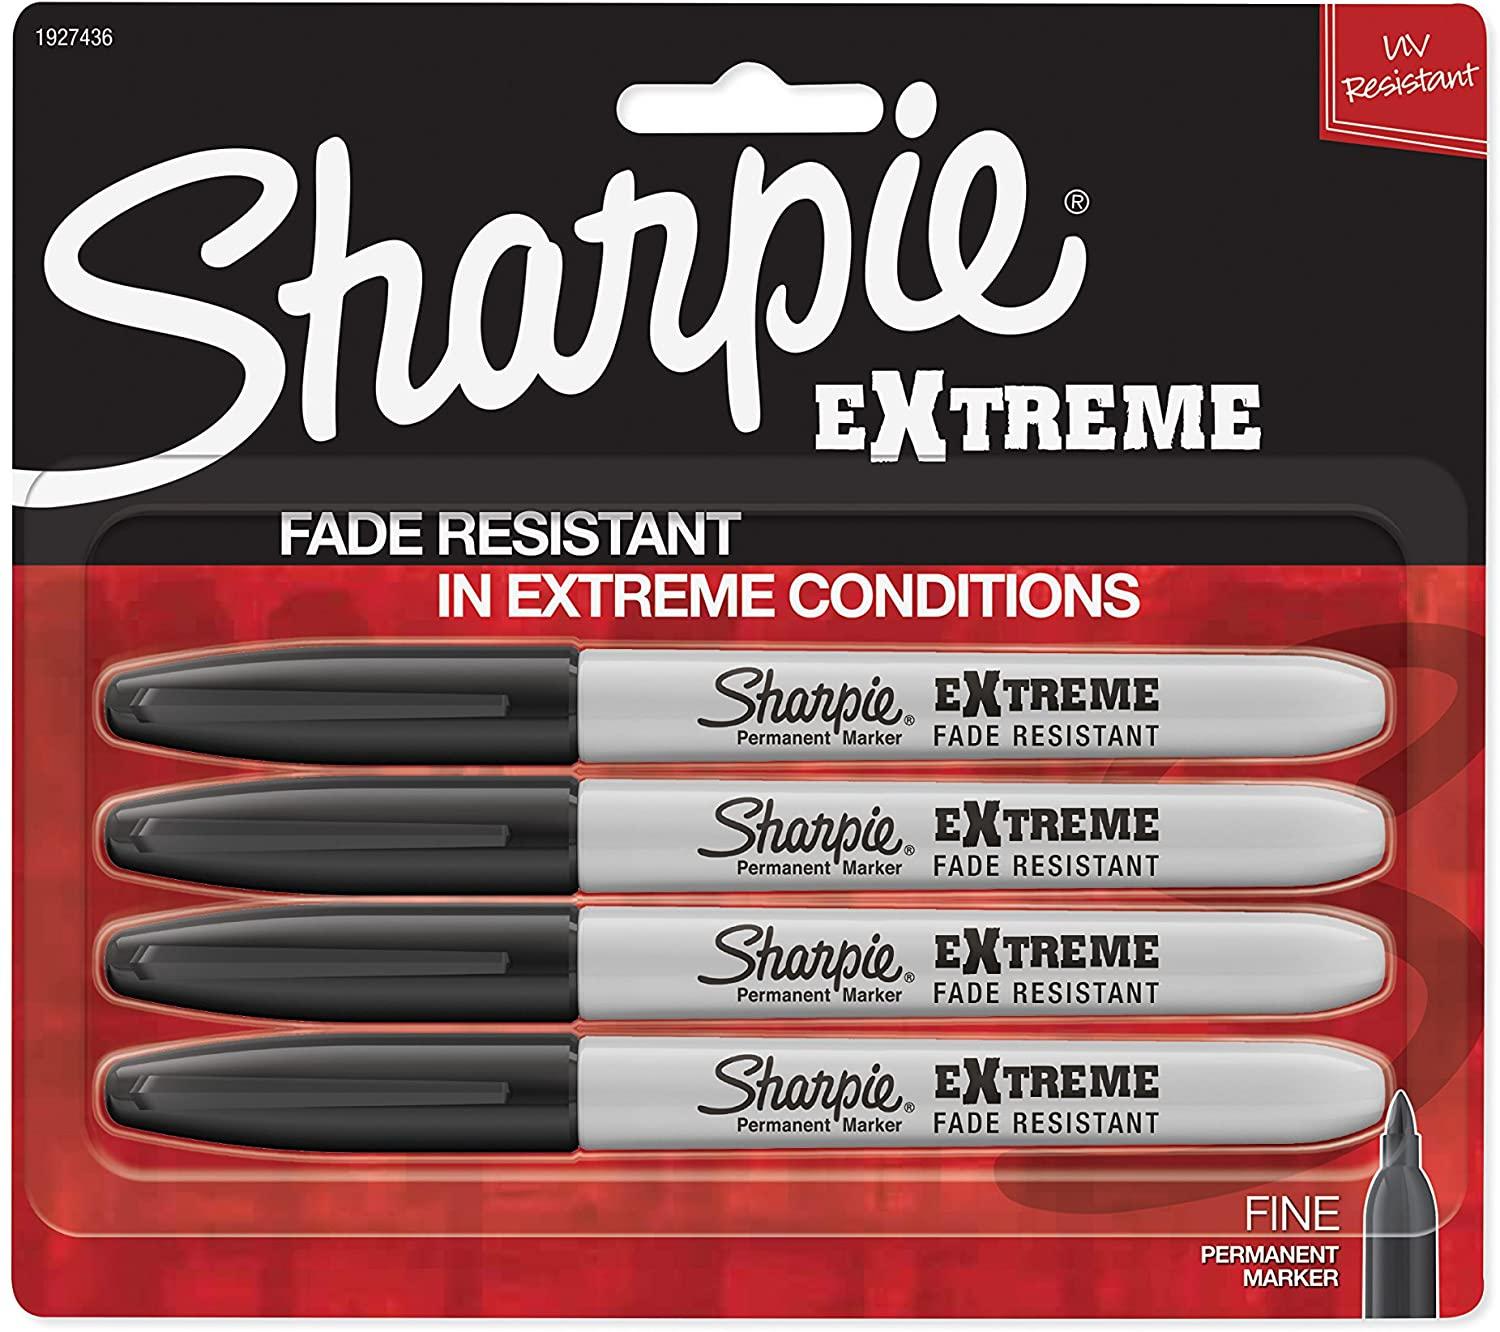 4 Sharpie Extreme Fine Tip Permanent Markers for $2.97 Shipped